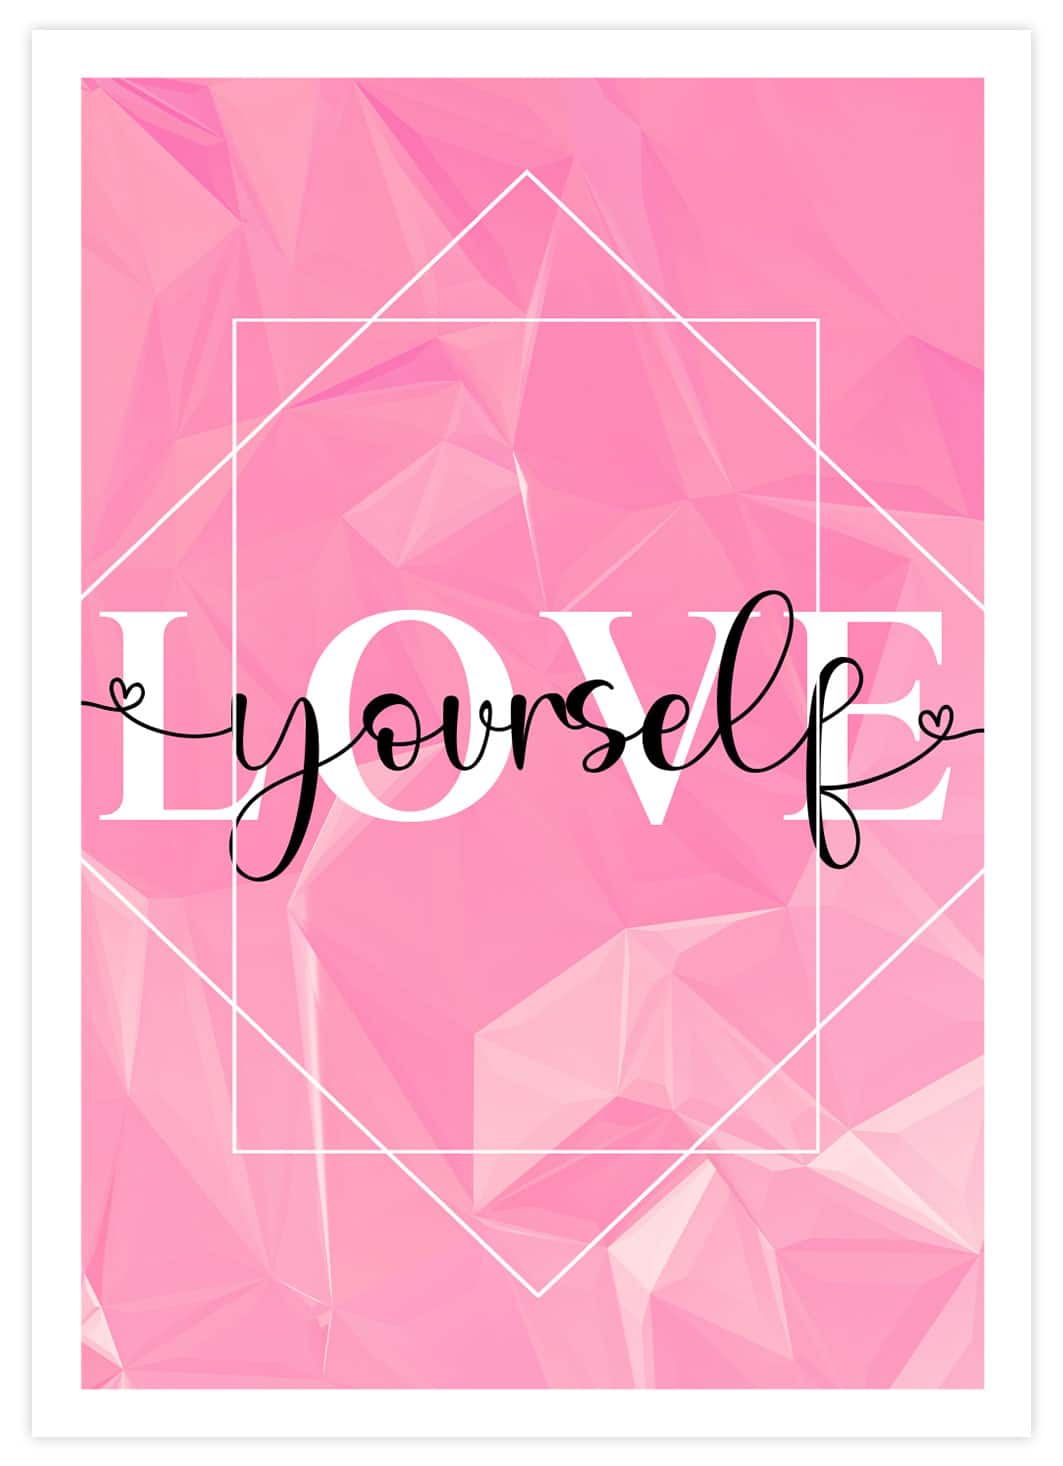 Love yourself Pink Poster